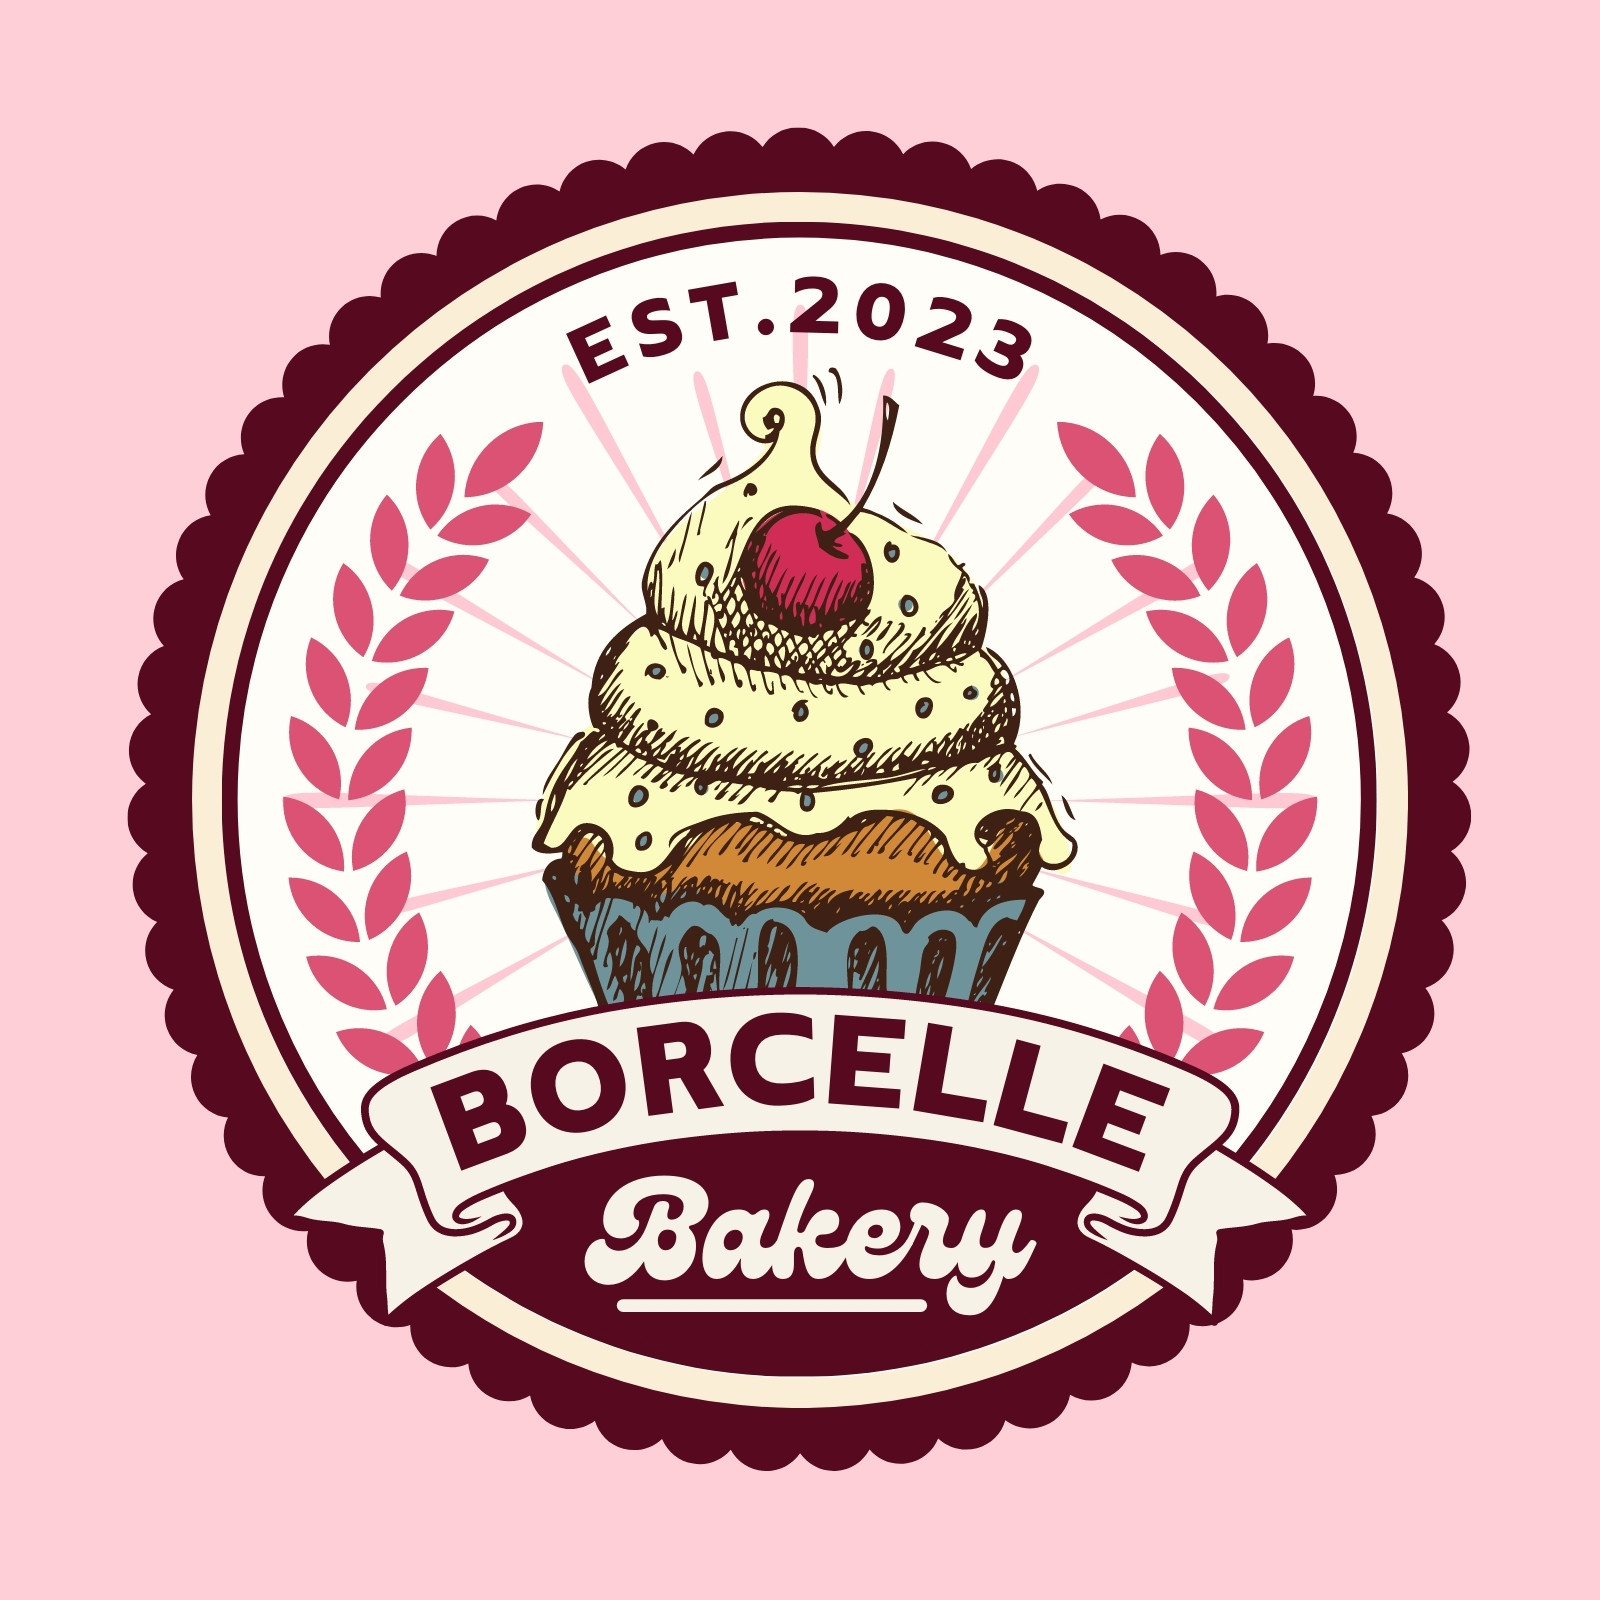 Cake logo vectors stock for free download about (35) vectors stock in ai,  eps, cdr, svg format .